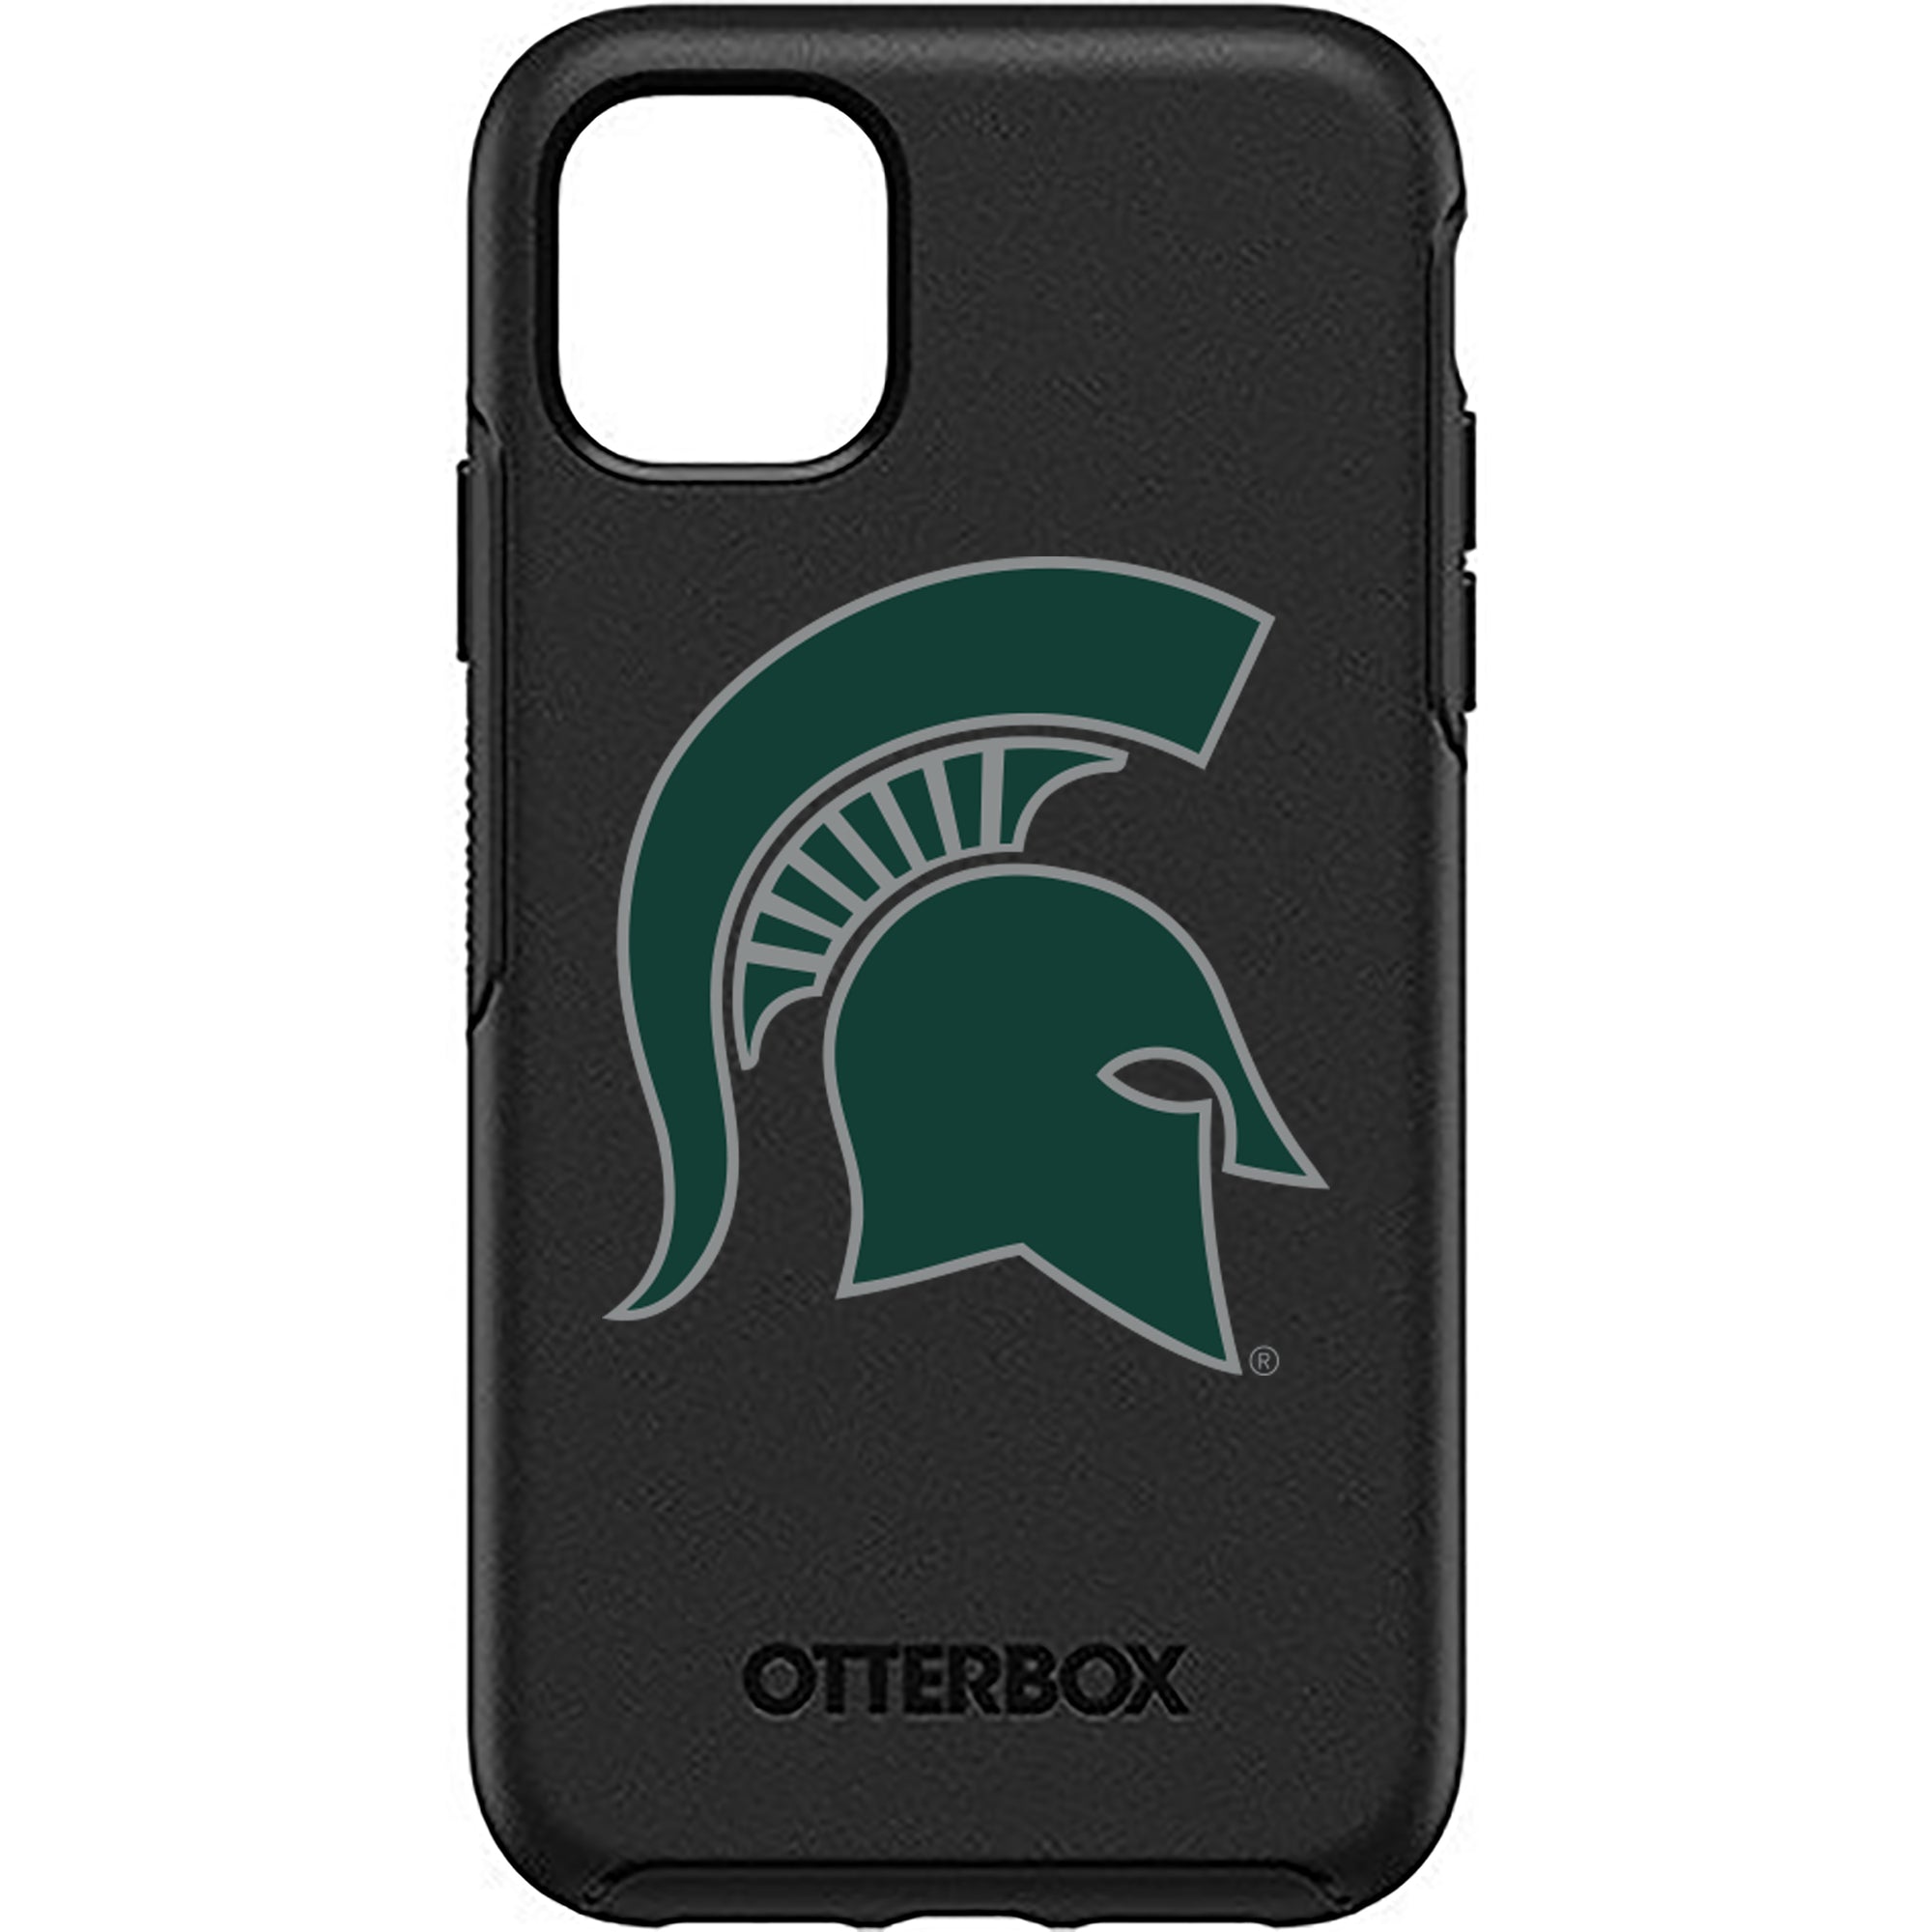 Michigan State Spartans Otterbox Symmetry Case (for iPhone 11, Pro, Pro Max)